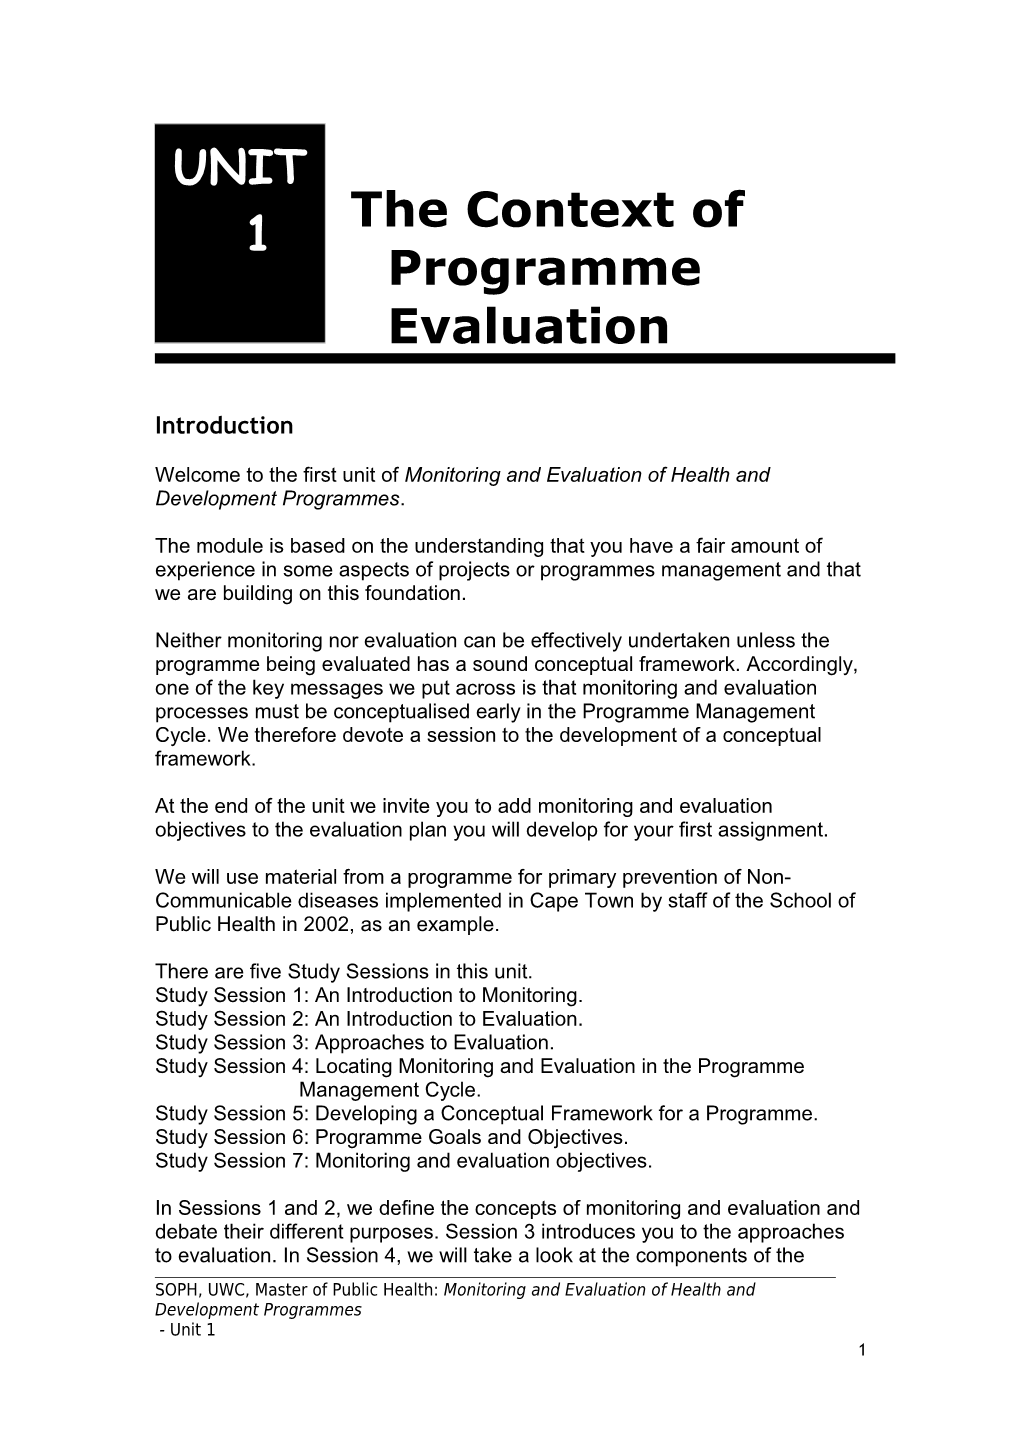 GUIDELINES for WRITERS (Soph POST-GRADUATE DIPLOMA MODULES) 12/07/02 Revised 31/03/03